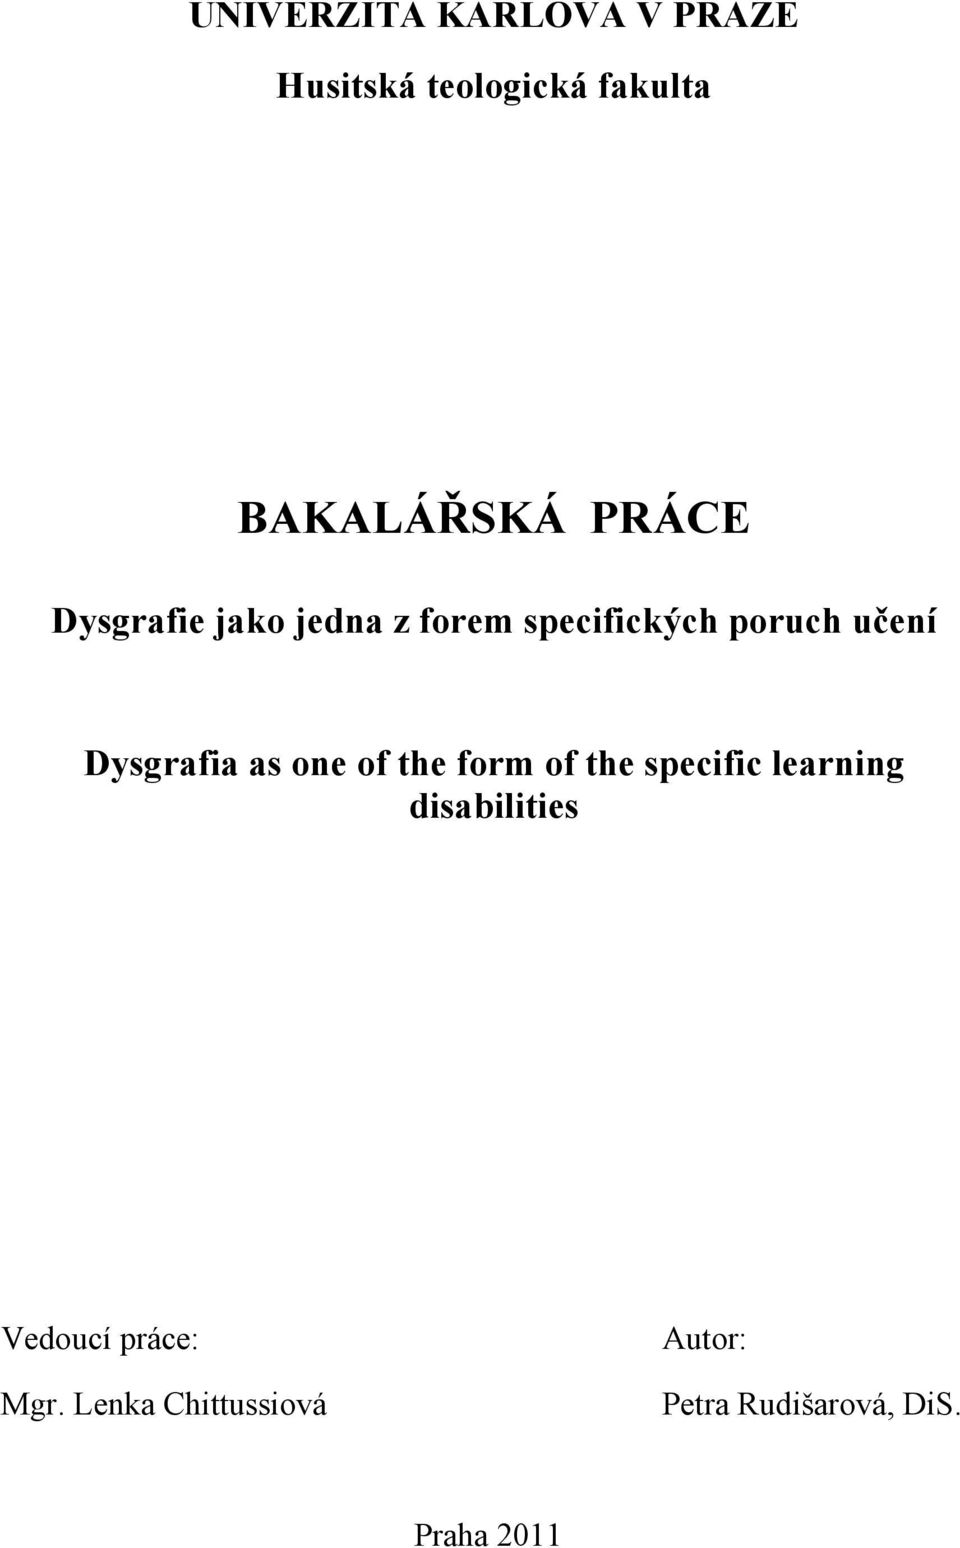 Dysgrafia as one of the form of the specific learning disabilities